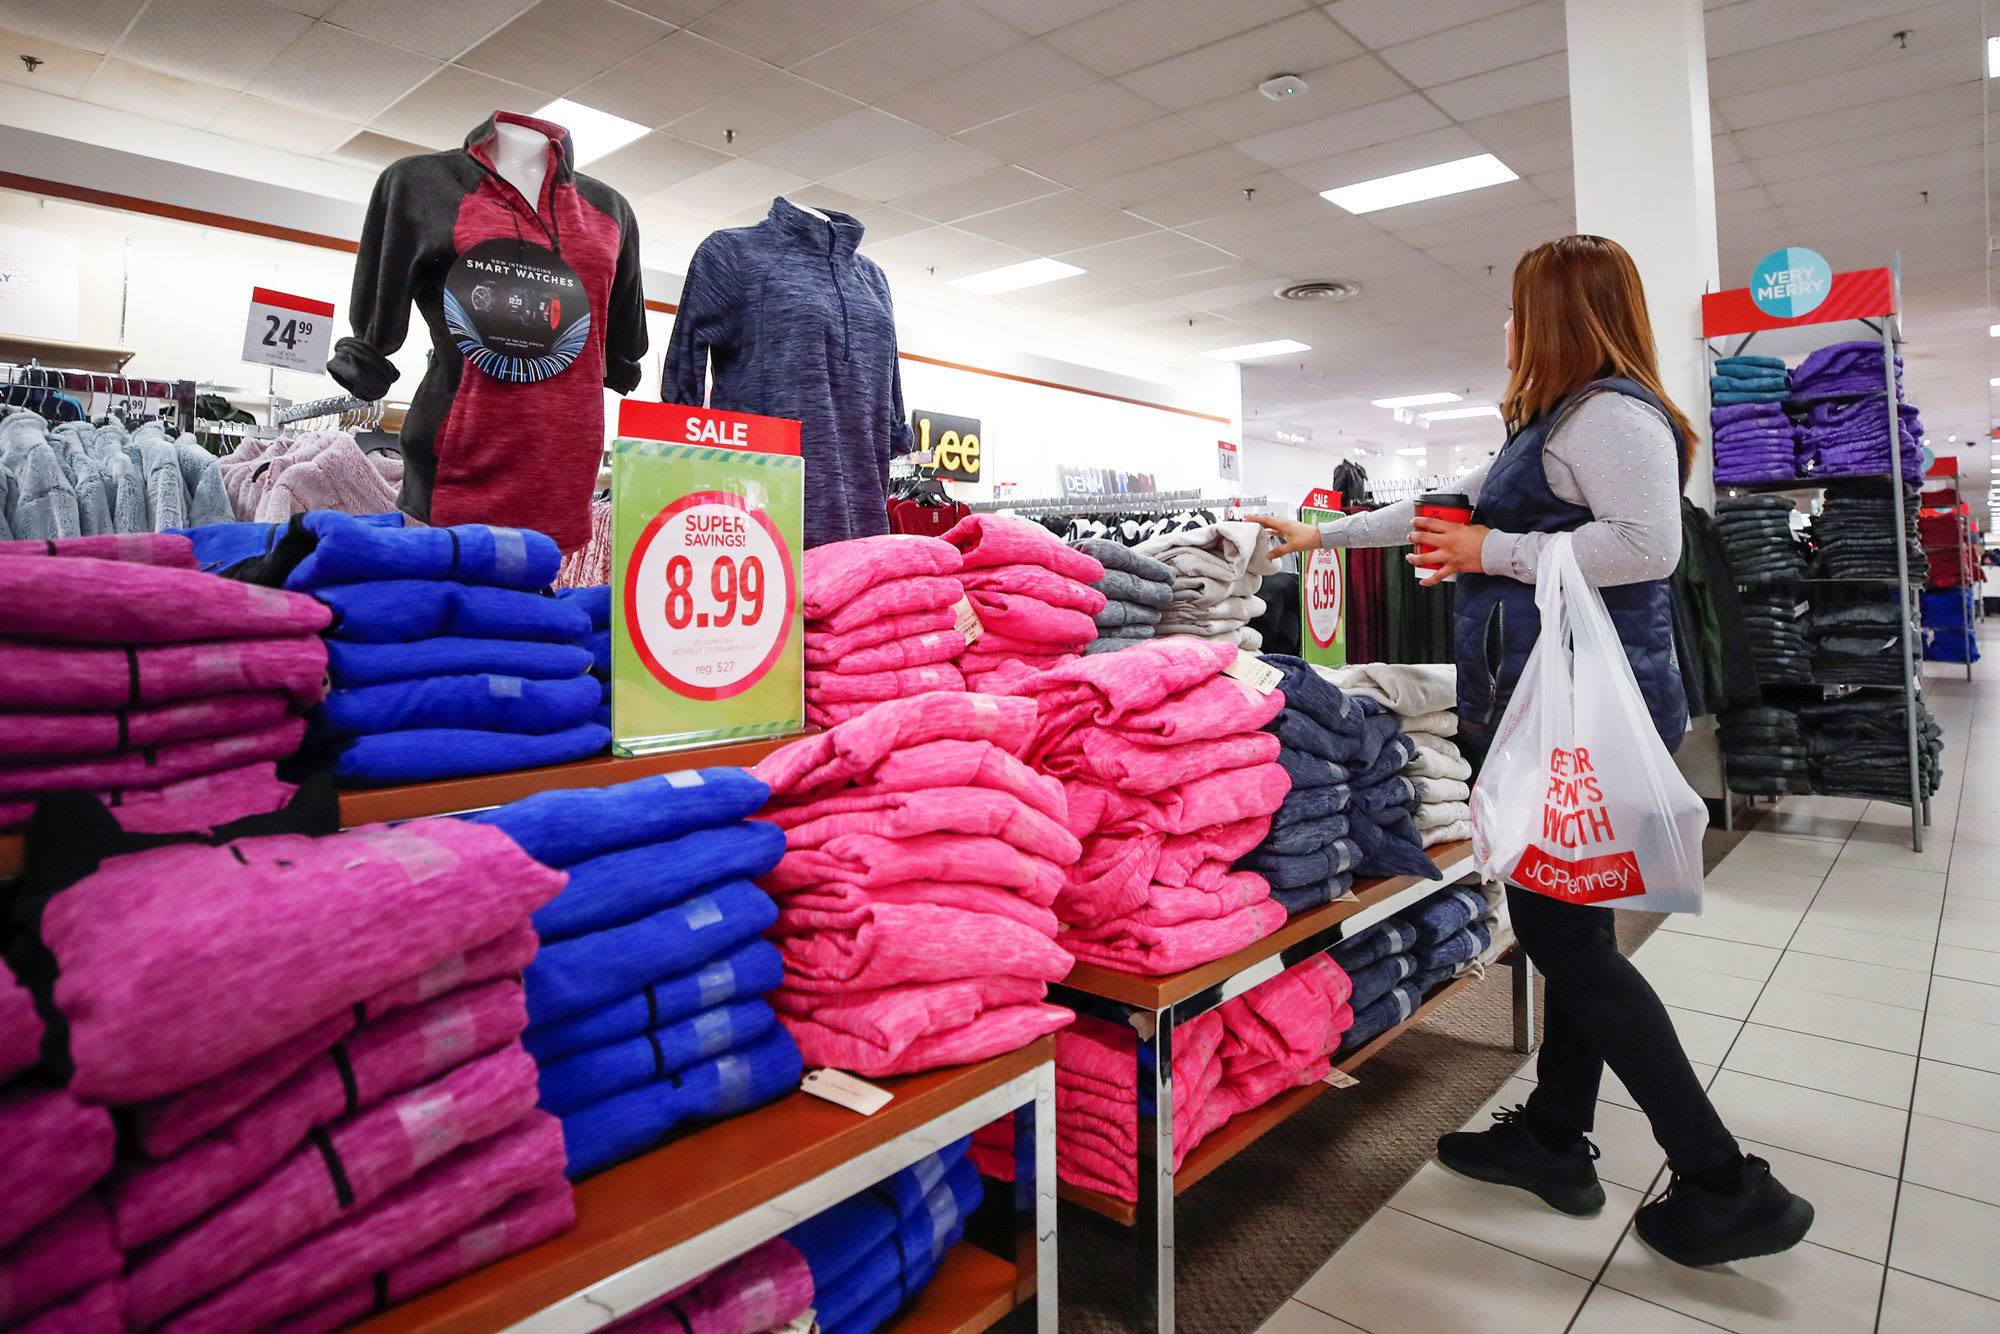 JC Penney prepping for debt talks ahead of the holiday season, Bloomberg says